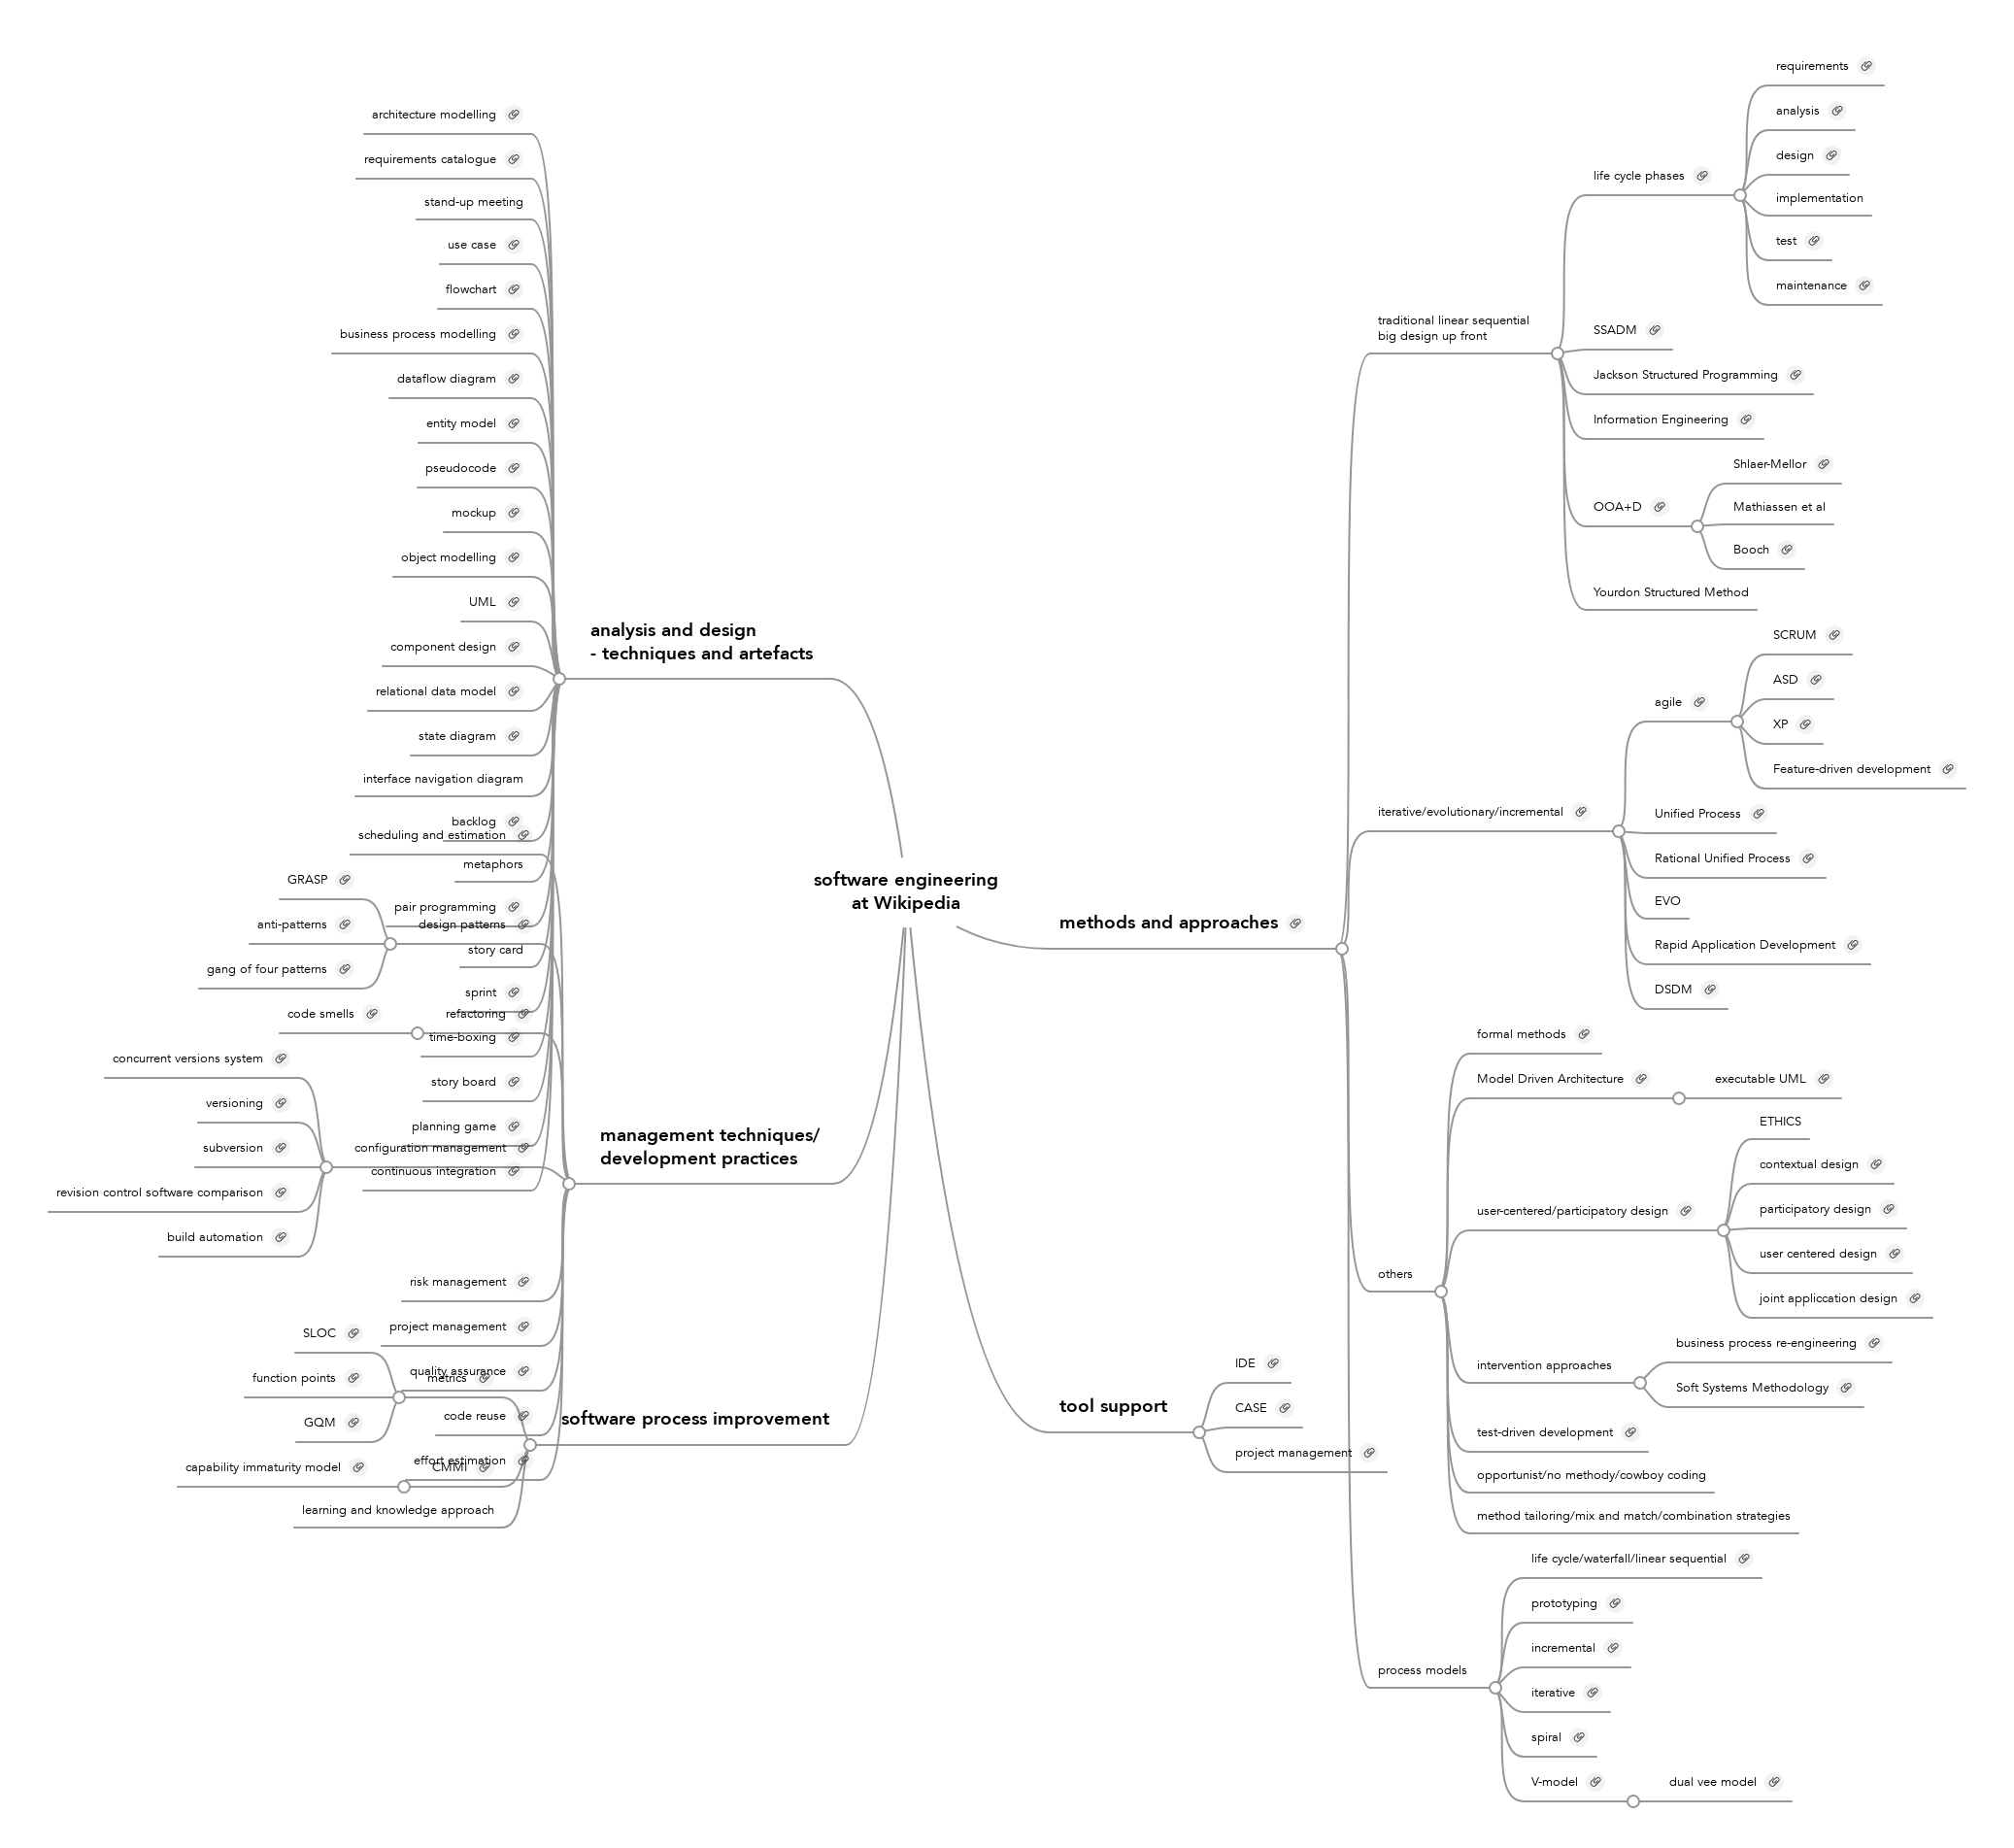 Model Driven Architecture on Software Engineering At Wikipedia   Mindmeister Mind Map